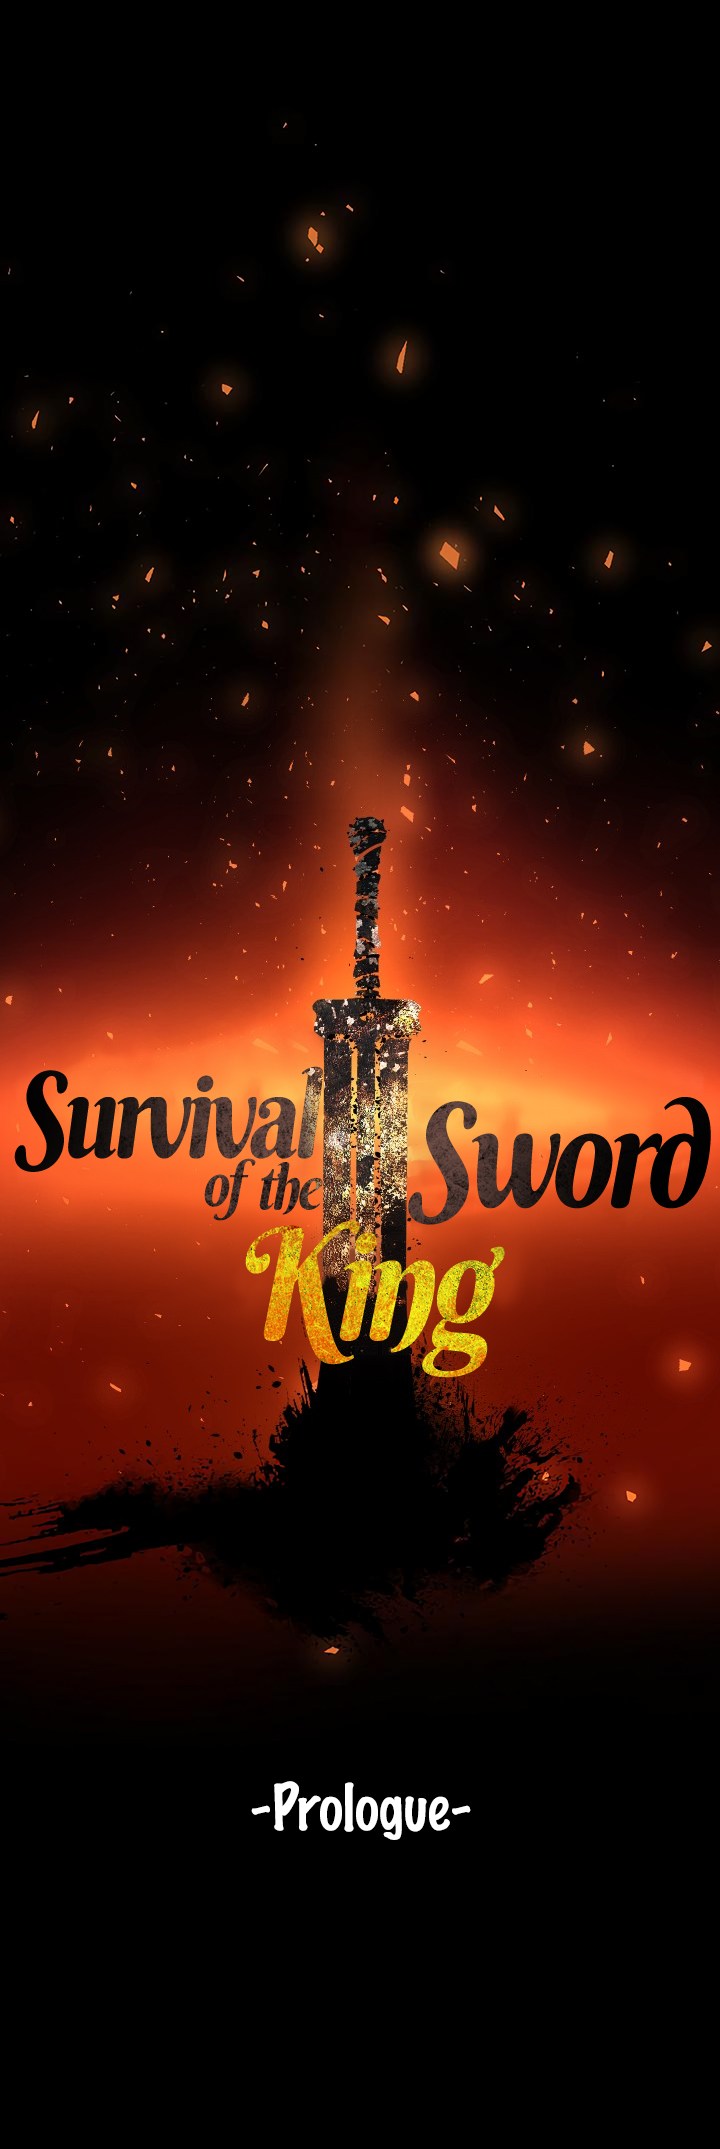 survival_story_of_a_sword_king_in_a_fantasy_world_0_20